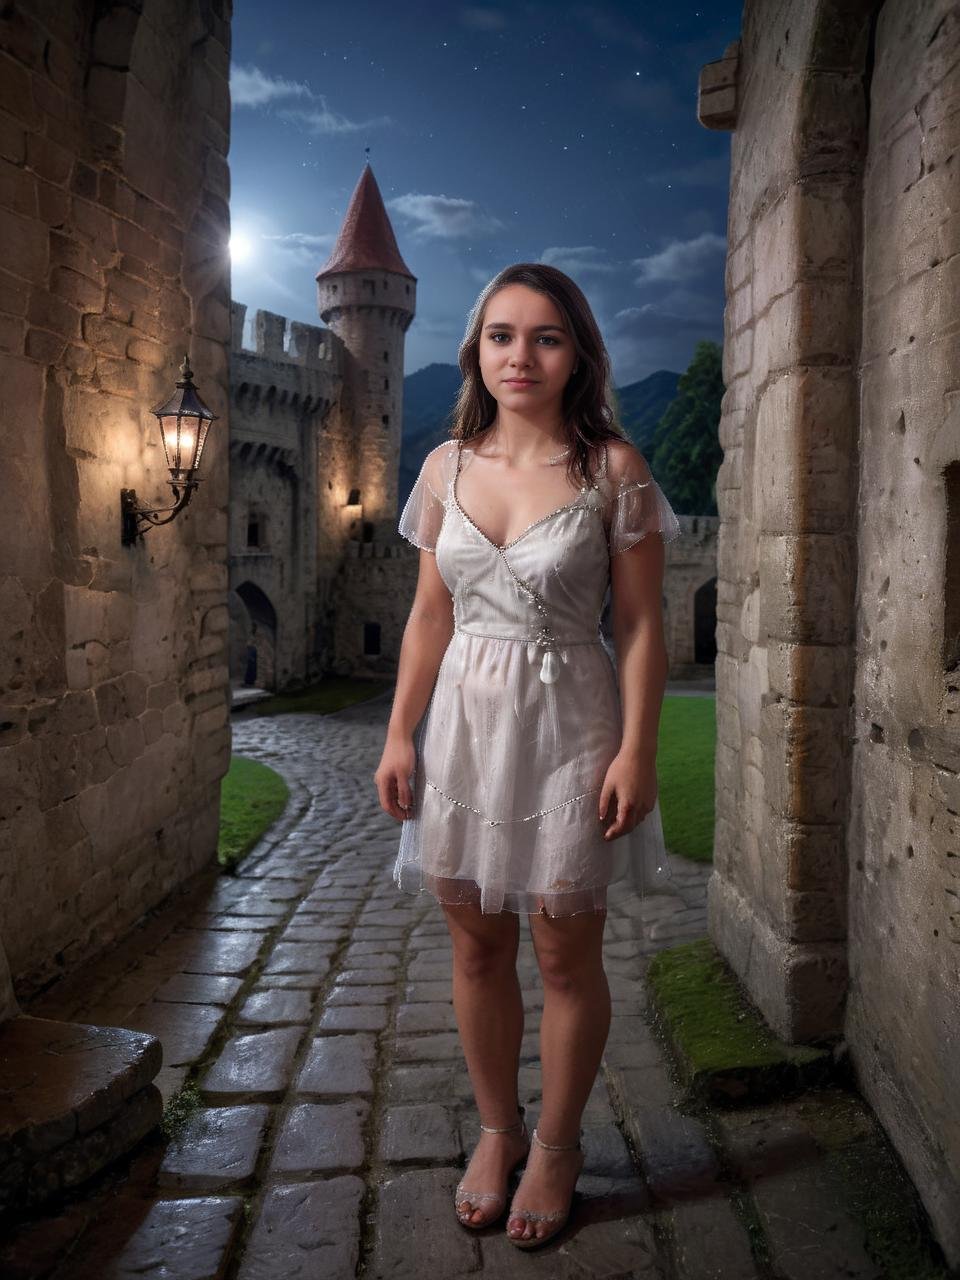 Hyperrealistic art beautiful cute 28 y.o. Vala woman is standing castle's courtyard, wearing white transparent dress,  manor, old castle, stone walls,night   <lora:polyhedron_god rays-000007:0.6>  <lora:Castle_manor:0.8>  <lora:Vanilka:0.9> . Extremely high-resolution details, photographic, realism pushed to extreme, fine texture, incredibly lifelike